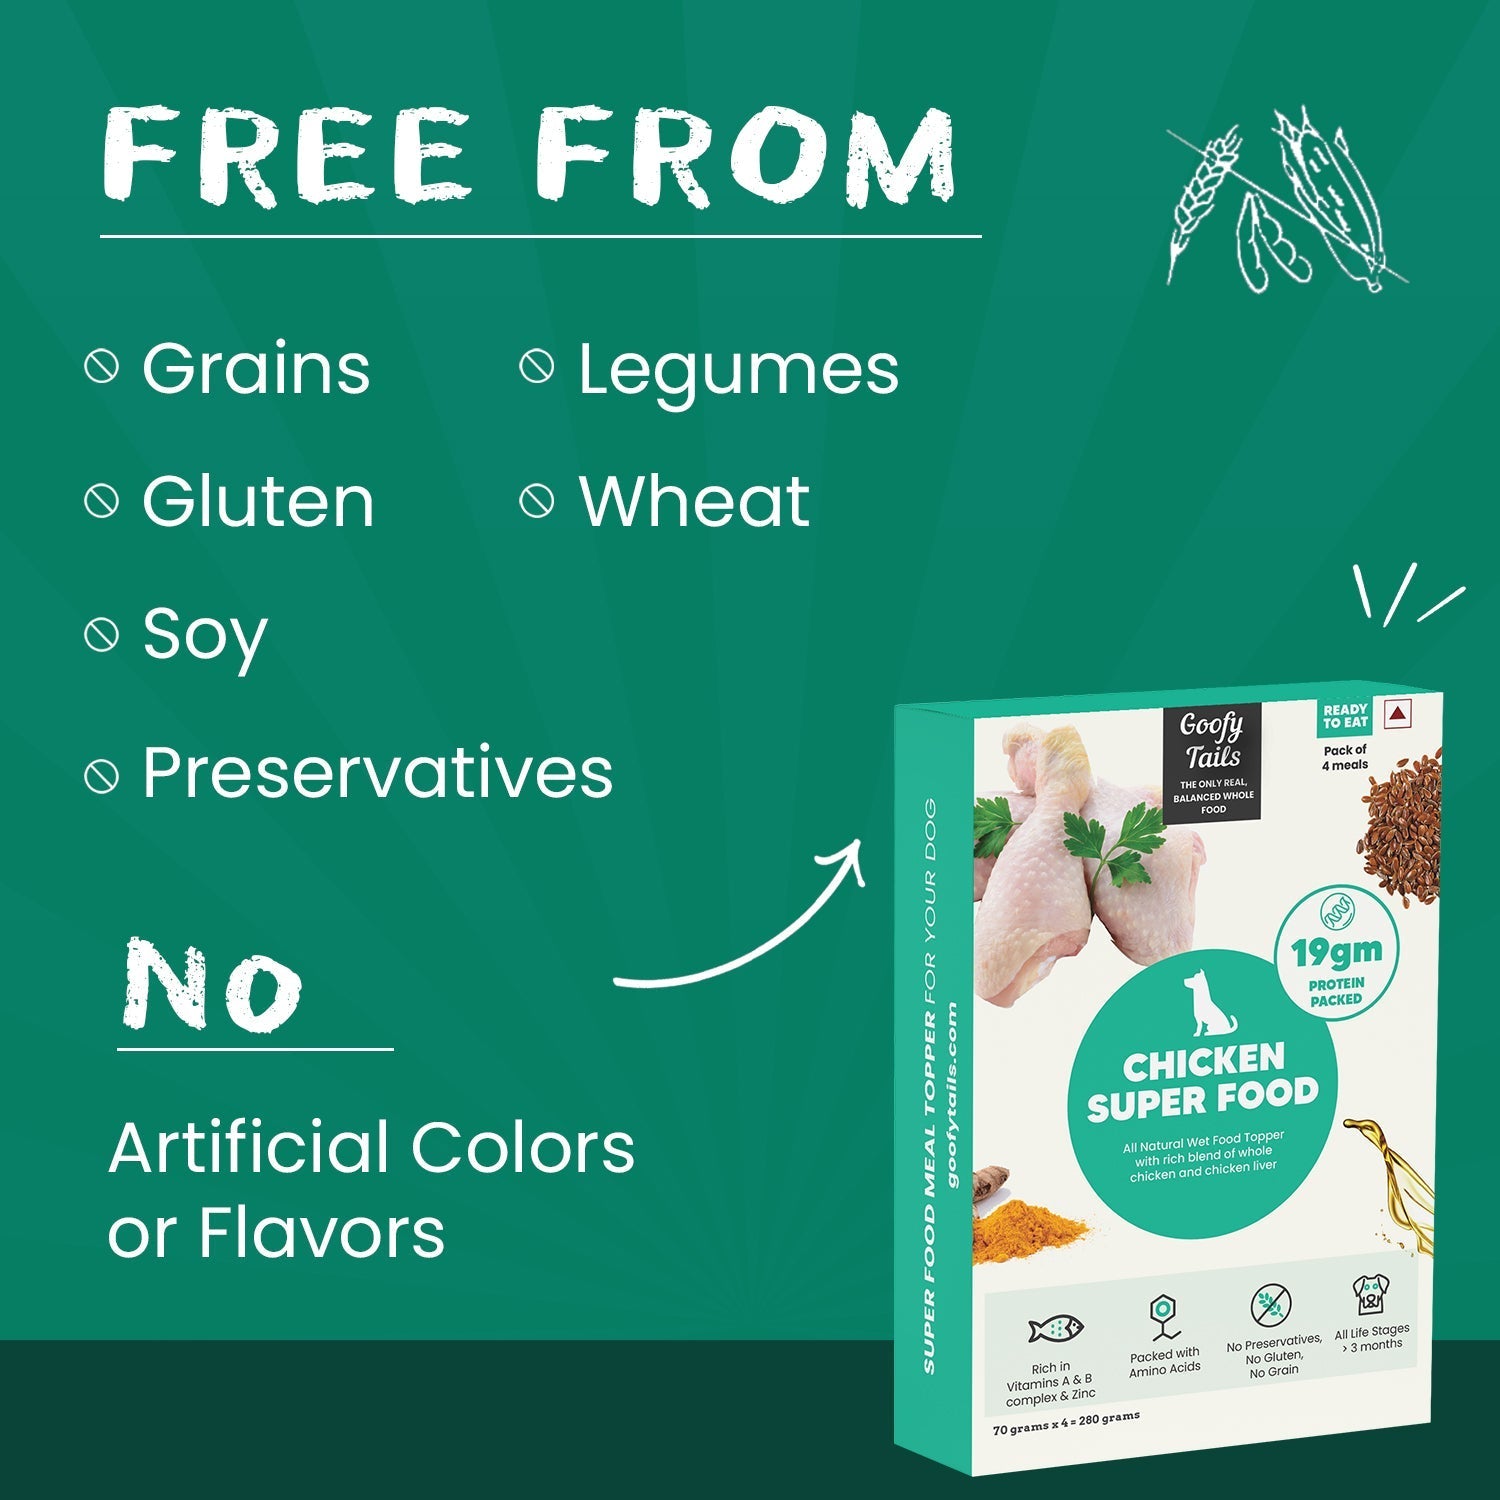 Chicken Superfood  meal topper free from grains, legumes, gluten, wheat, soy, preservatives  from gooofytails.com